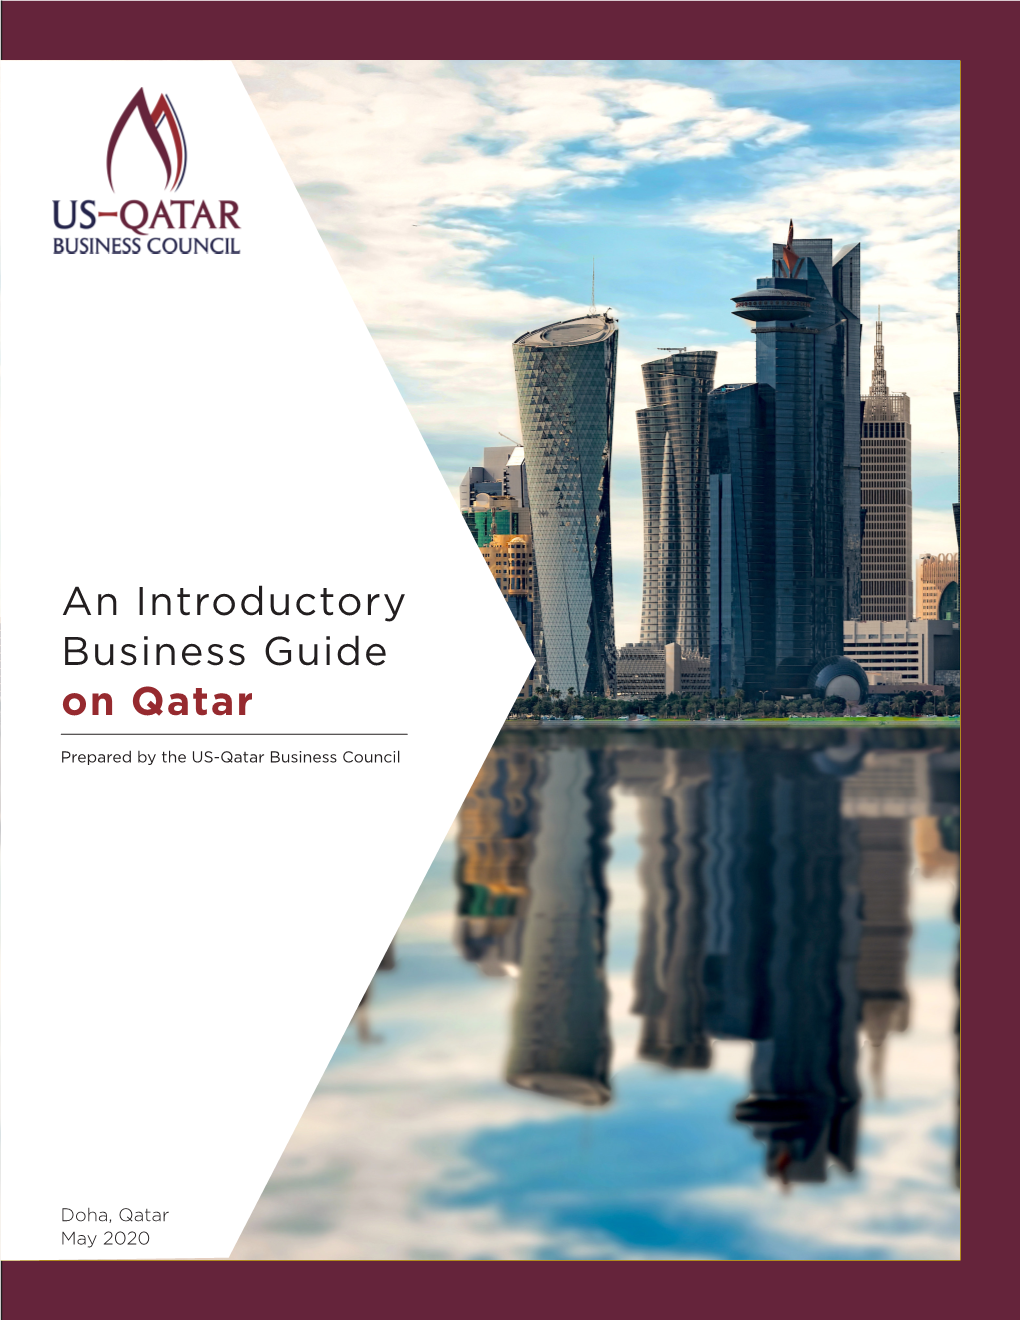 An Introductory Business Guide on Qatar